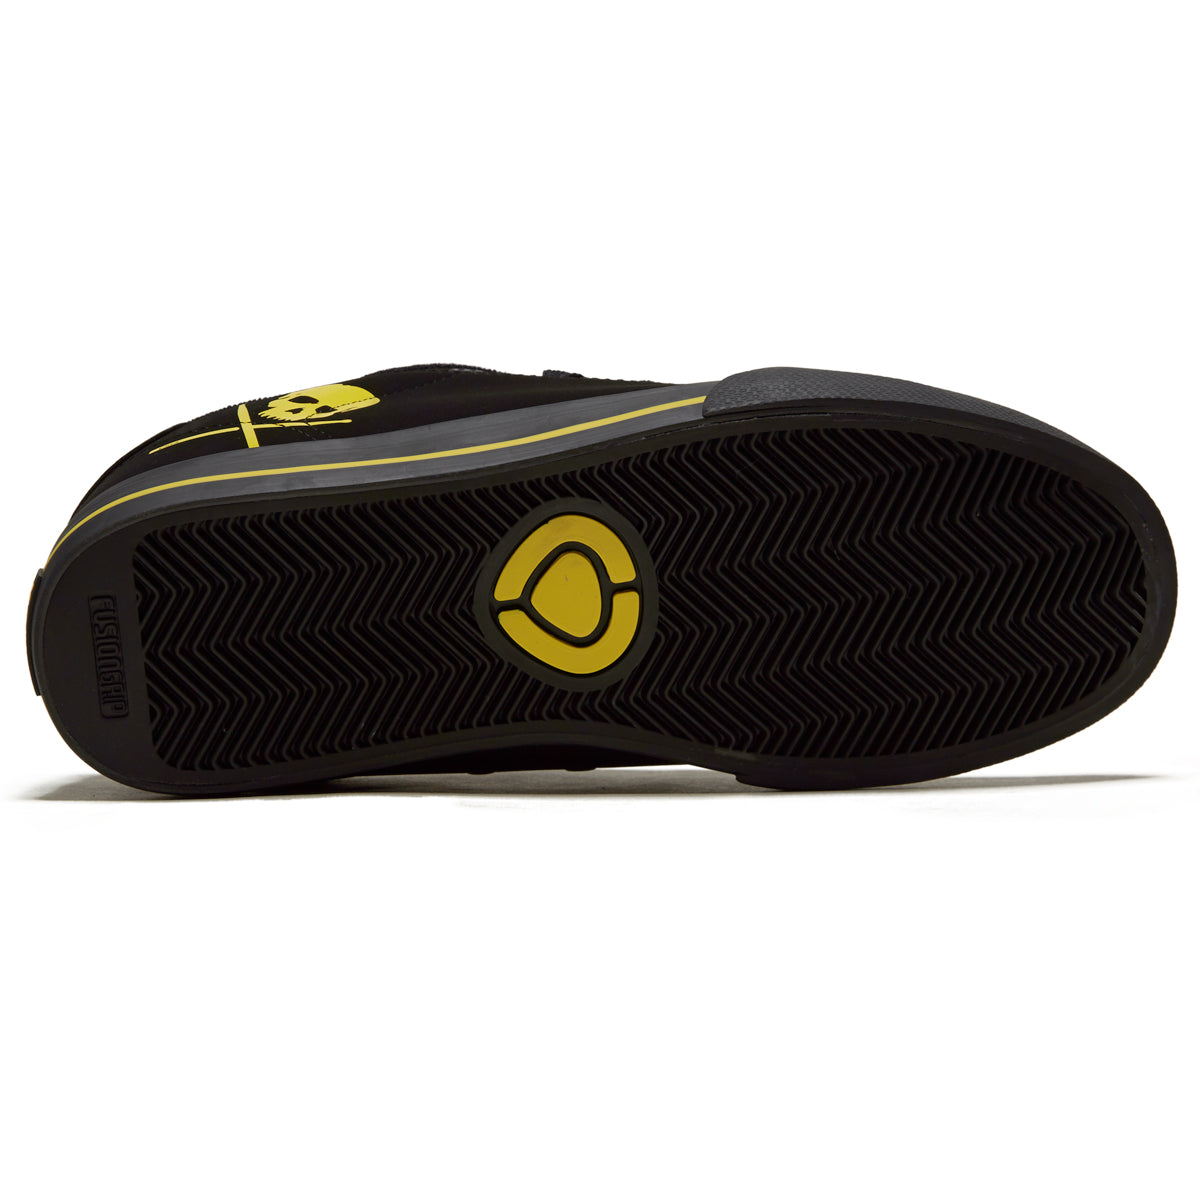 C1rca Buckler SK Shoes - Black/Spectra Yellow image 4